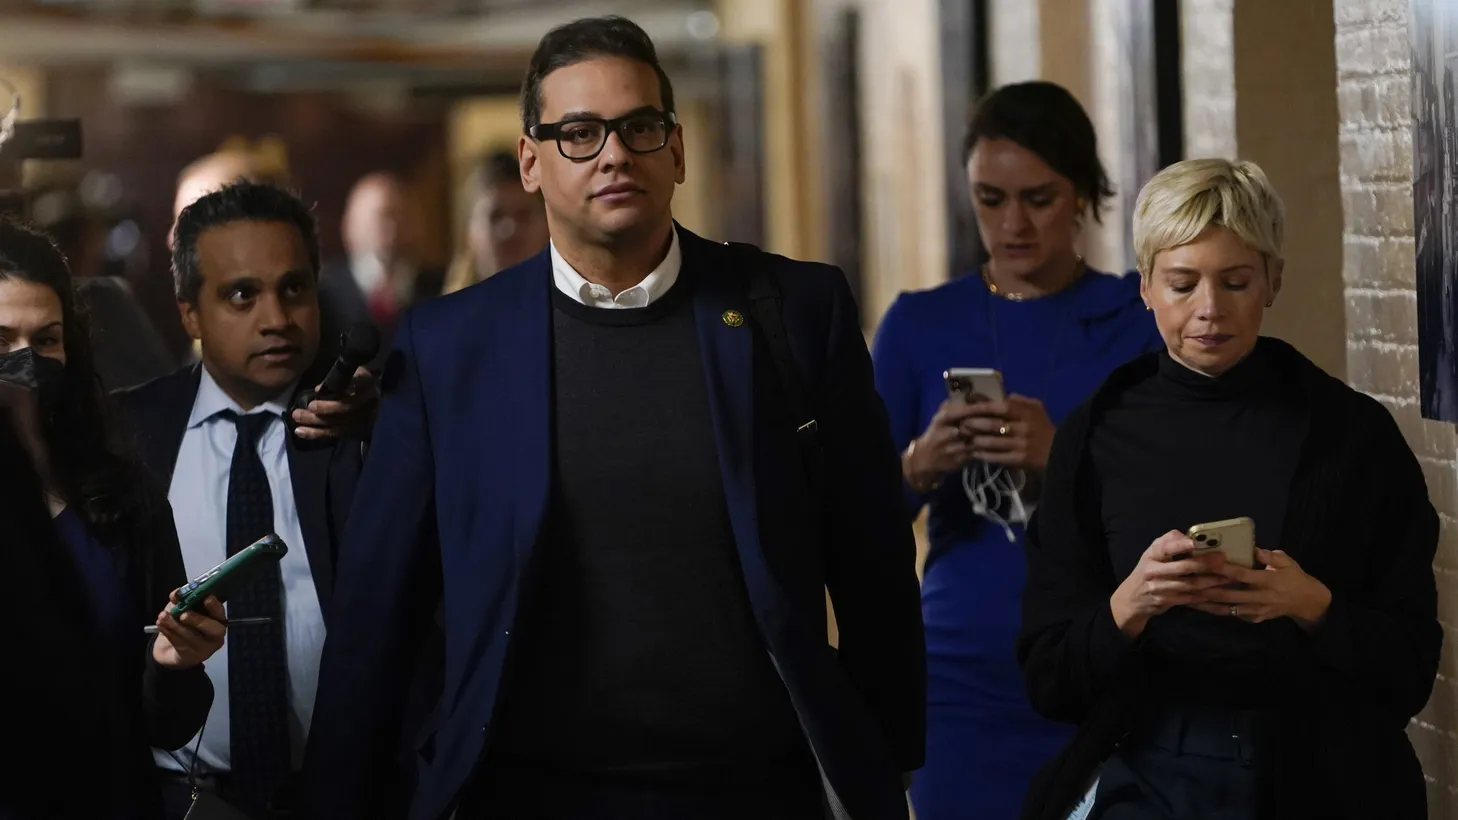 Rep. George Santos departs a morning GOP Conference meeting on Tuesday, January 31, 2023 at the U.S. Capitol after telling his House Republican colleagues he would recuse himself from his committee positions.